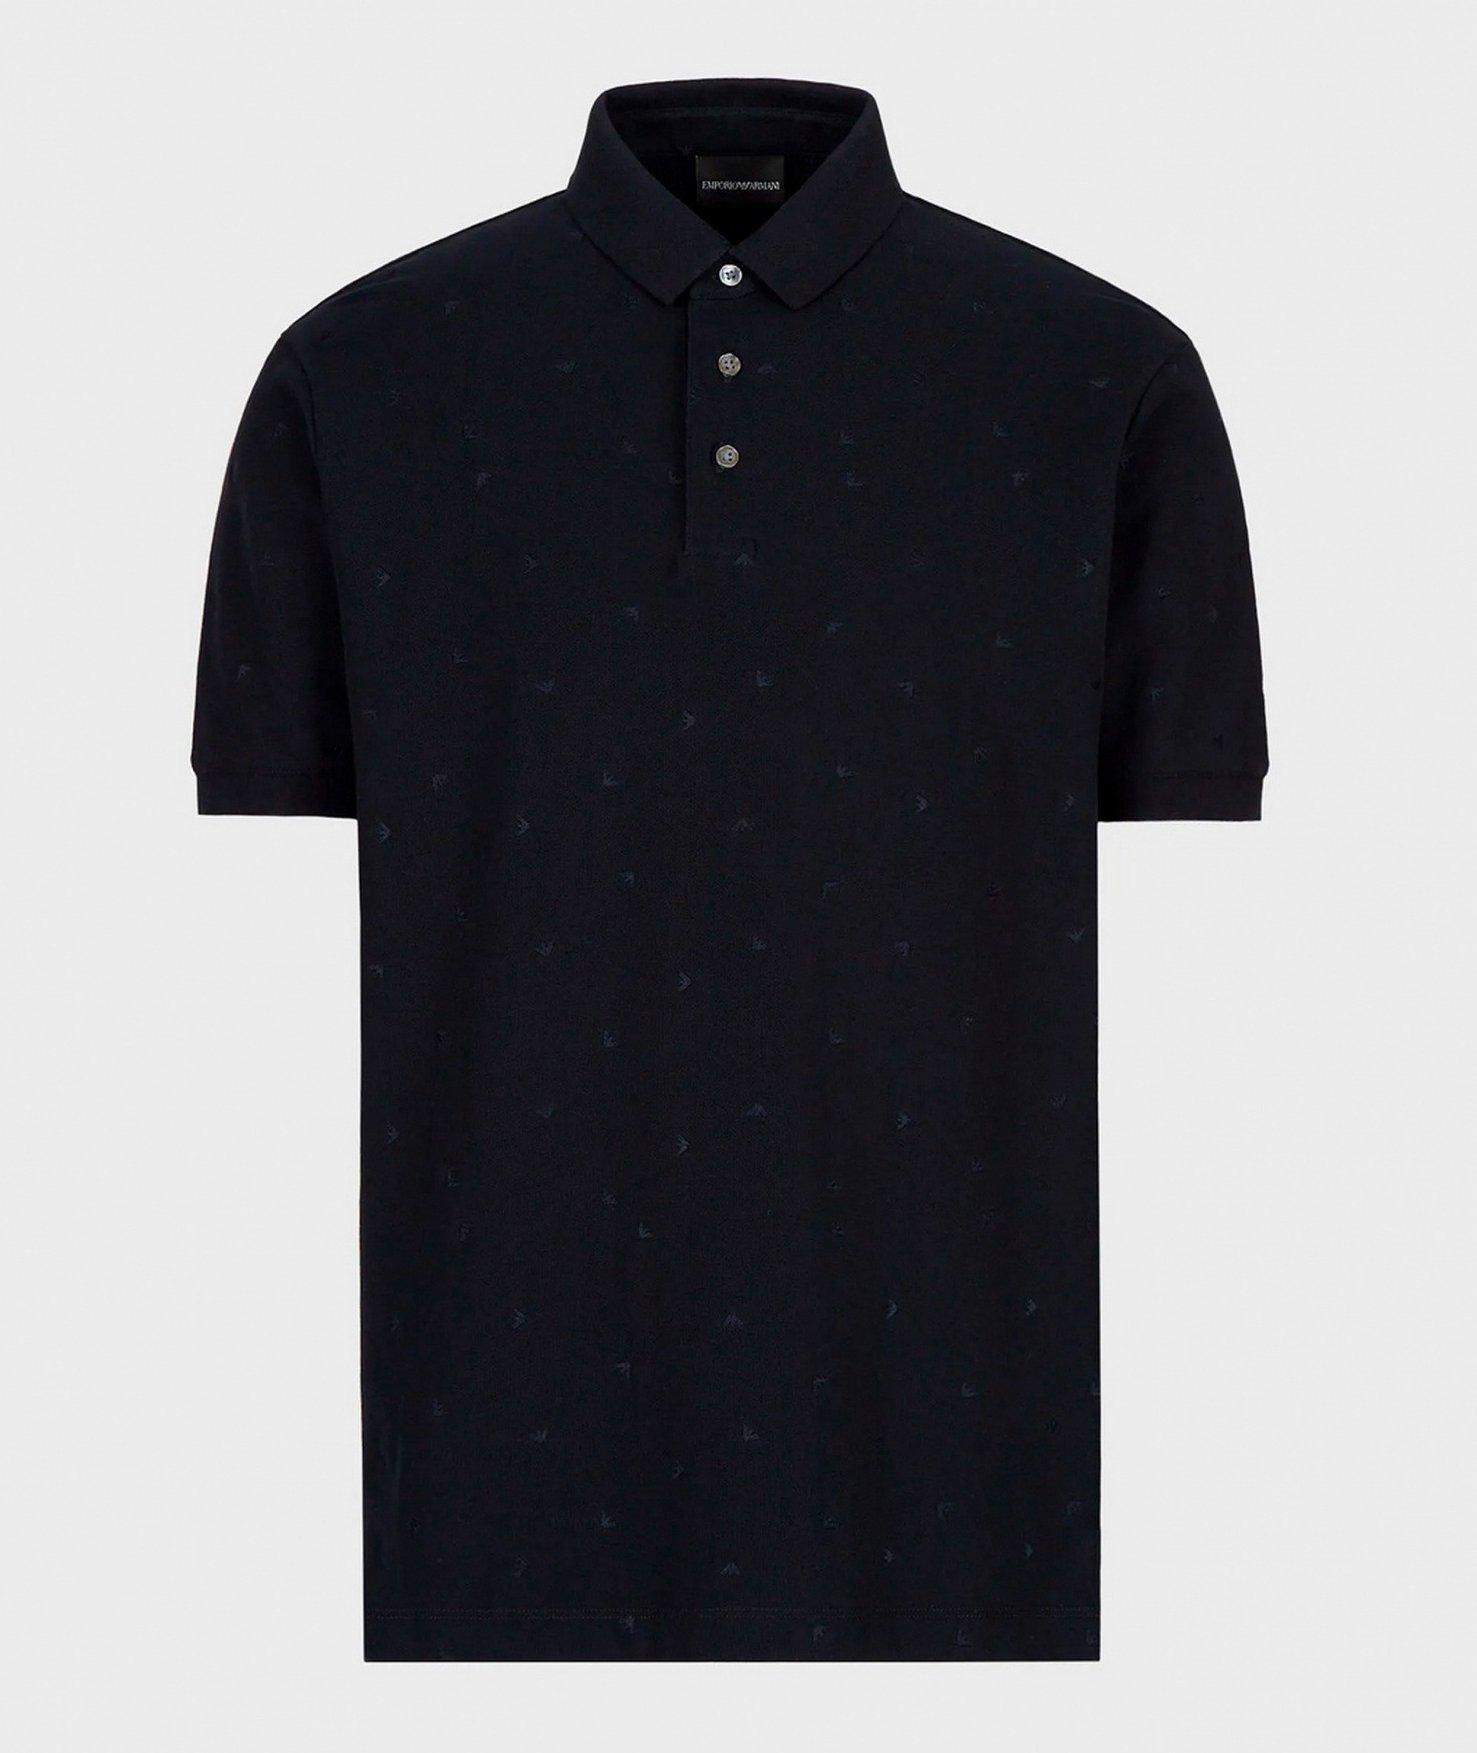 All-Over Eagle Pattern Polo image 0